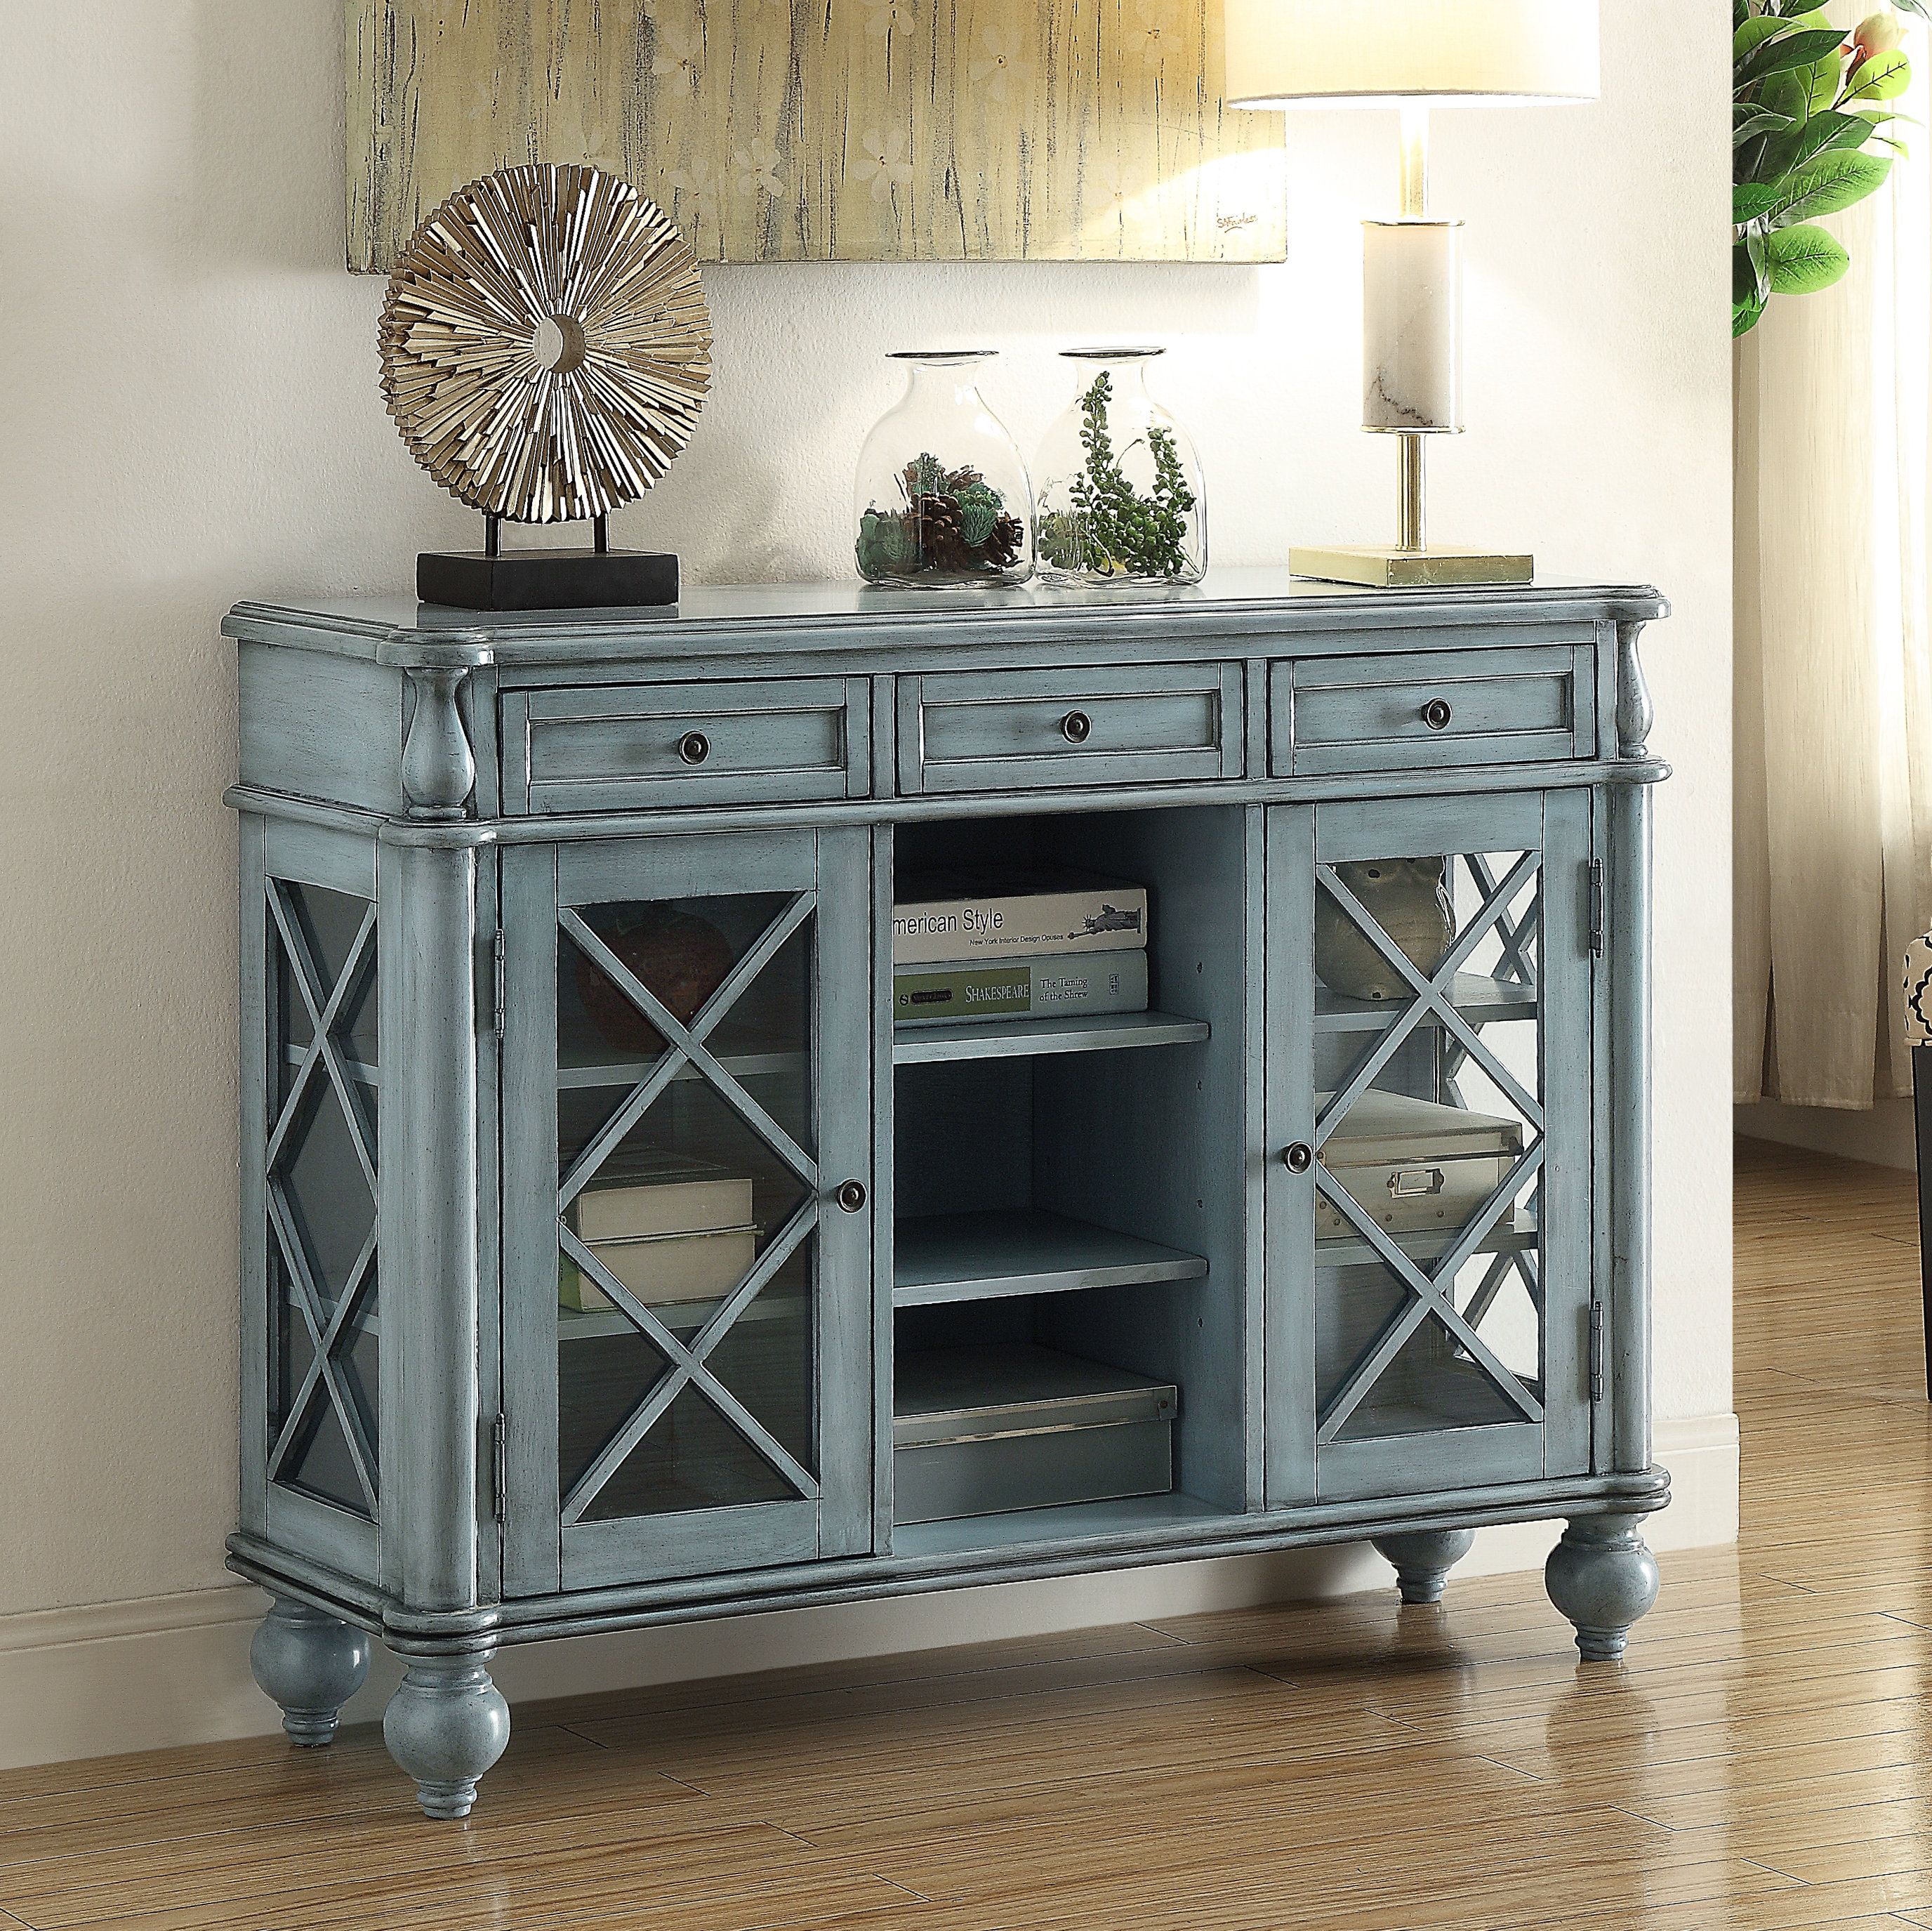 Sideboards & Buffet Tables You'll Love In 2019 | Wayfair For Newest Stillwater Sideboards (View 14 of 20)